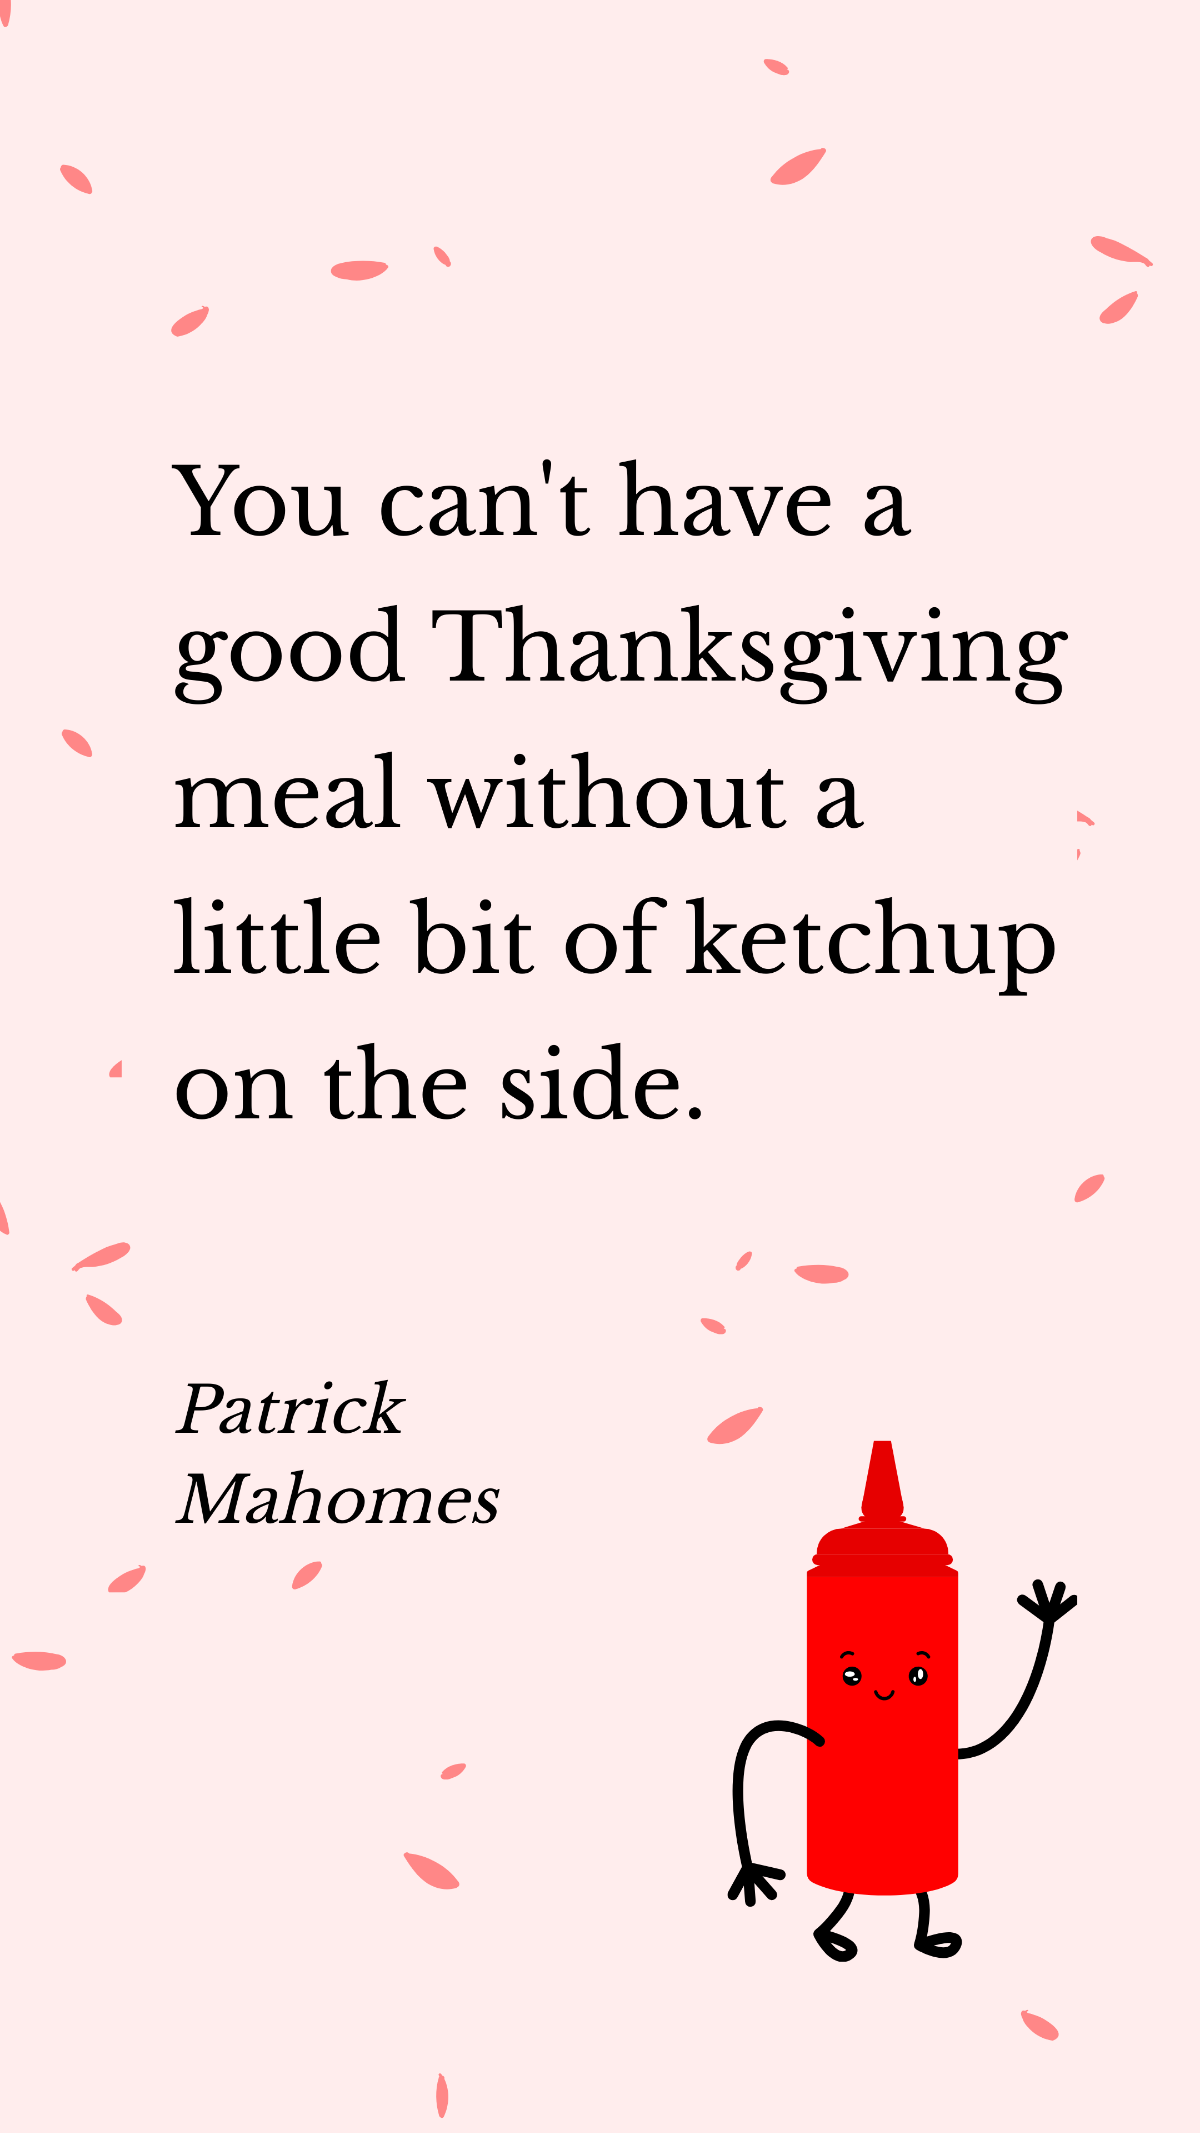 Patrick Mahomes - You can't have a good Thanksgiving meal without a little bit of ketchup on the side. Template